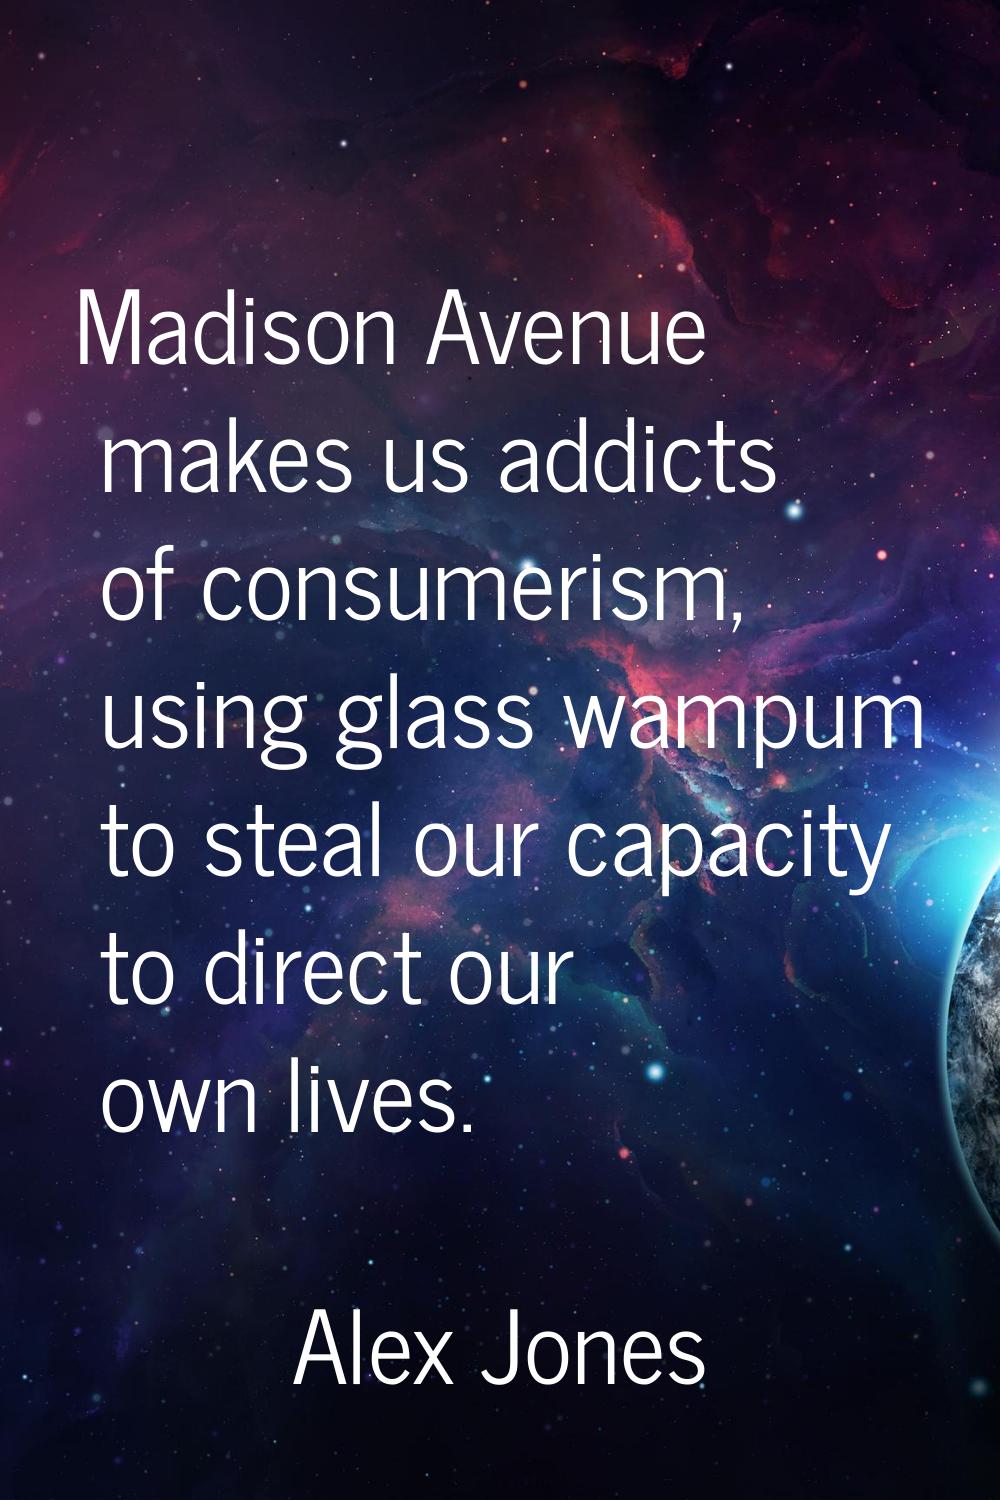 Madison Avenue makes us addicts of consumerism, using glass wampum to steal our capacity to direct 